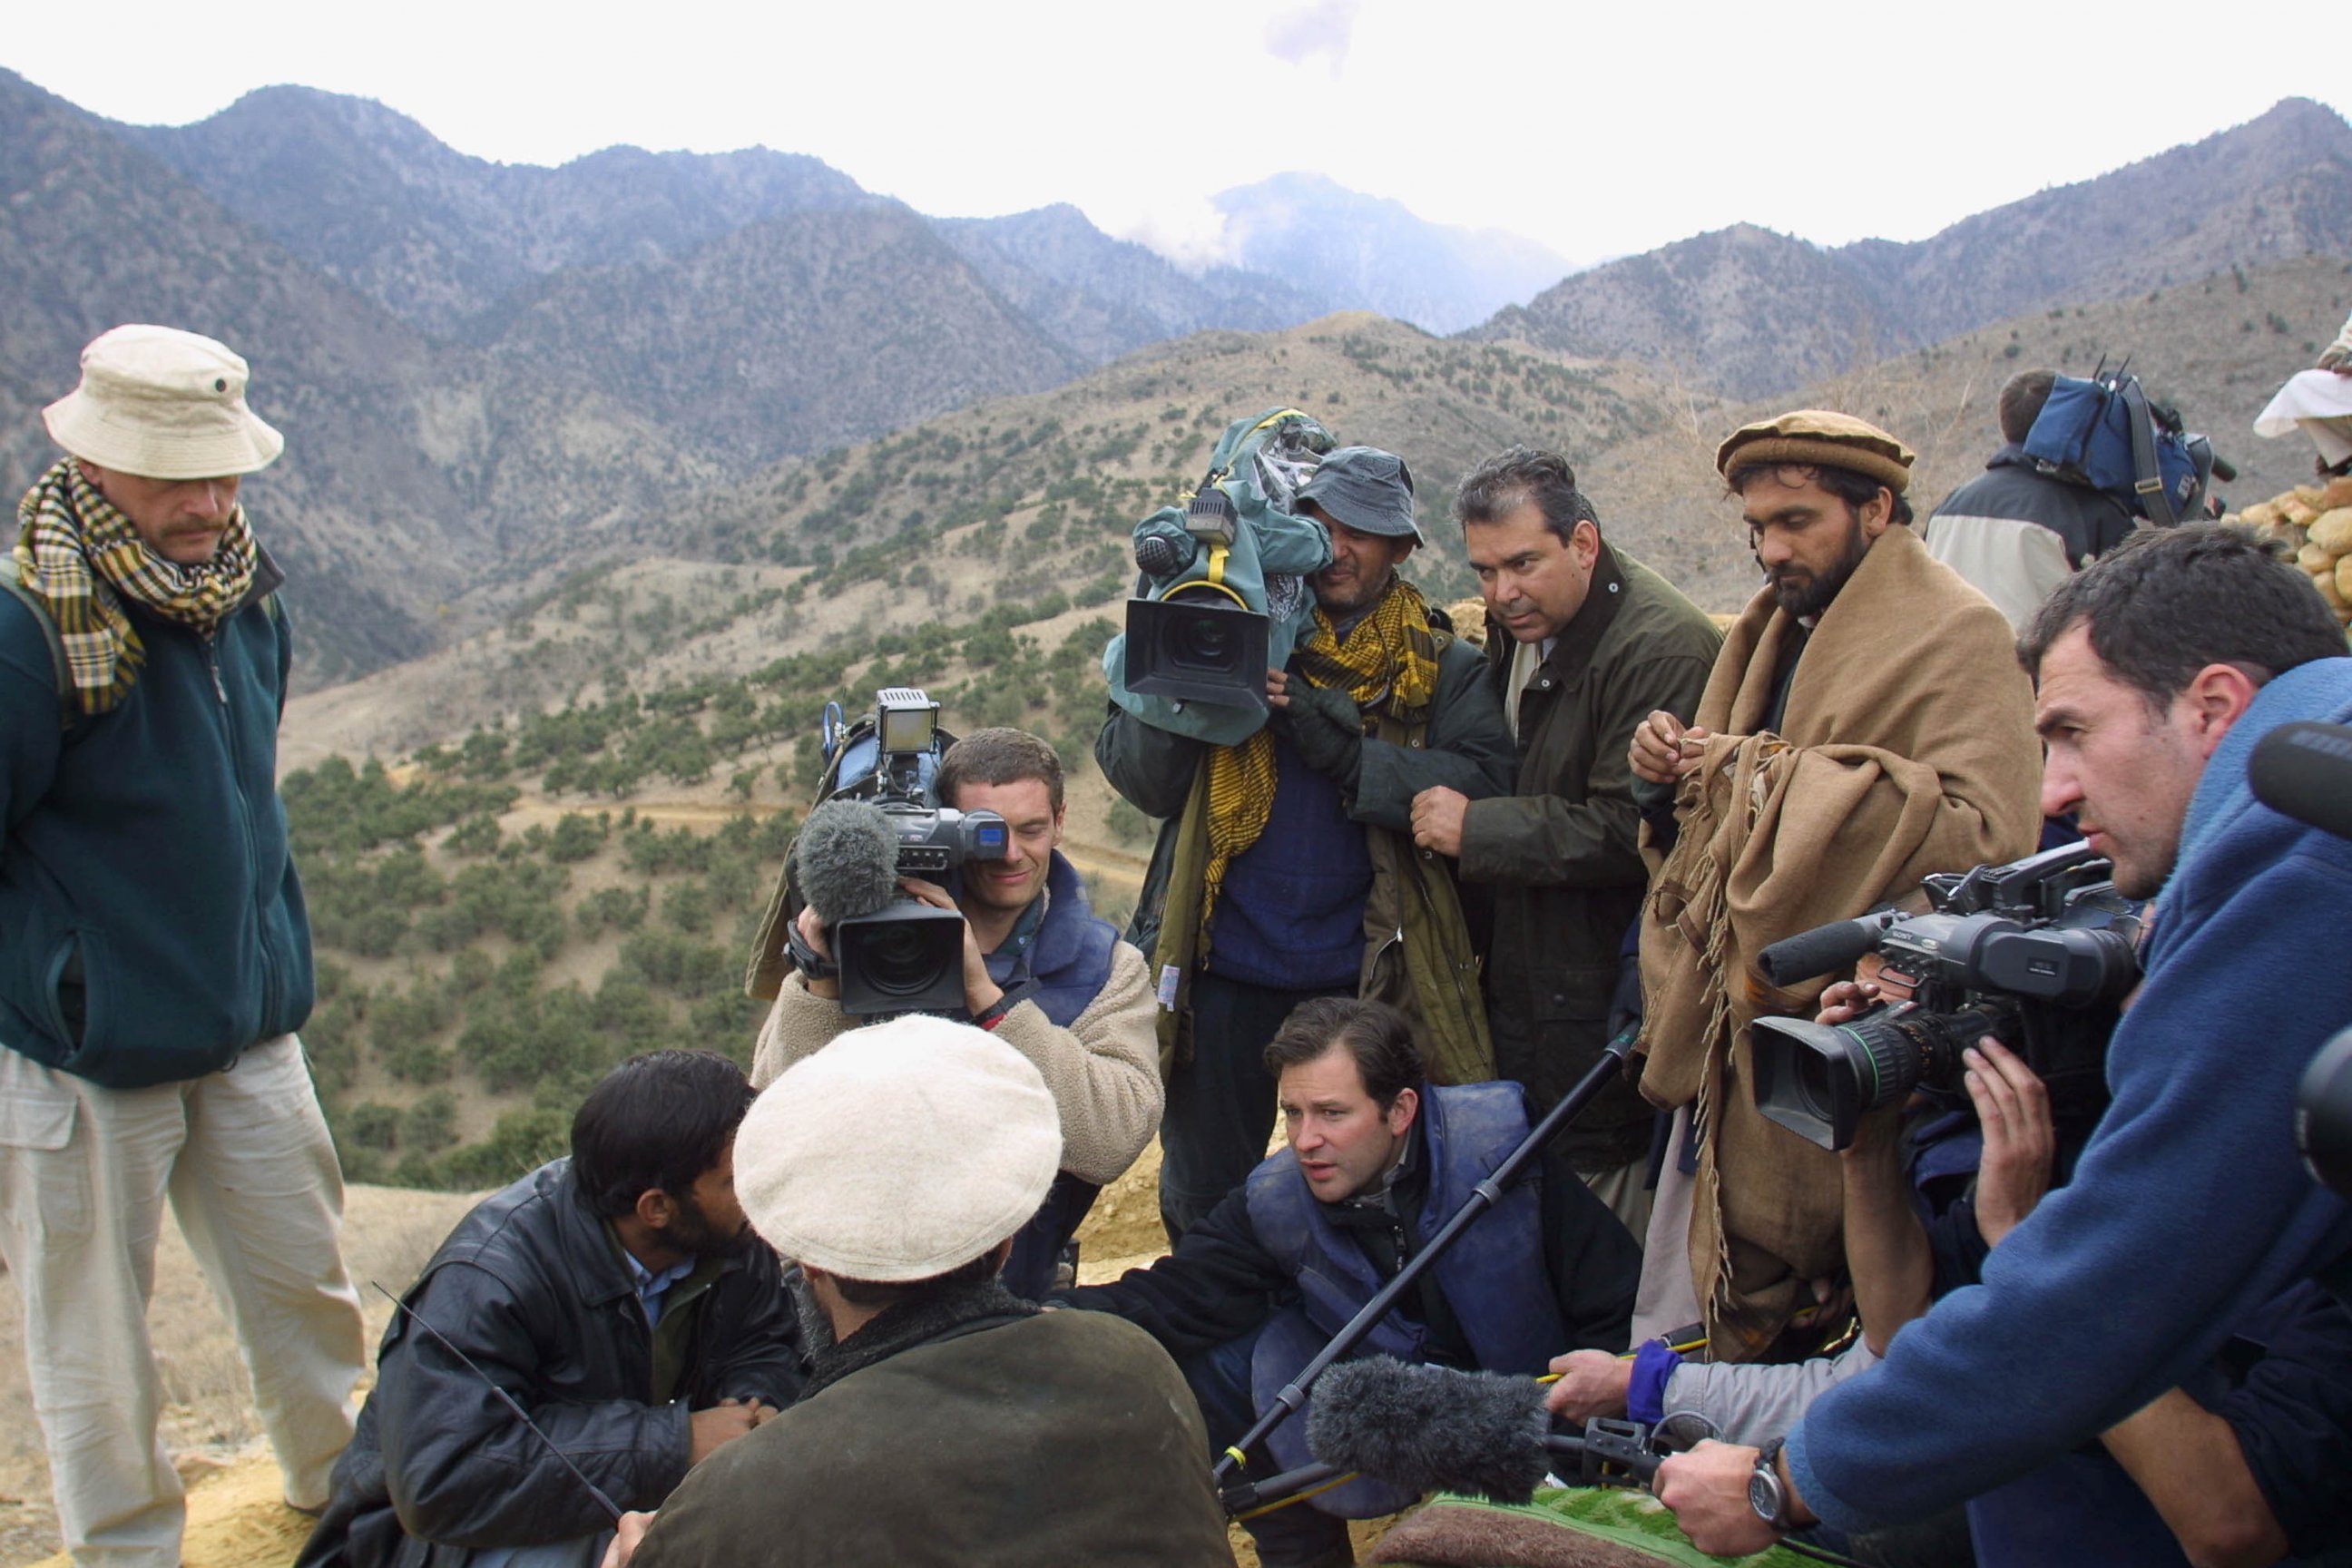 PHOTO: Dan Harris, amongst other journalists, is pictured questioning Hazrat Ali on Dec. 14, 2001 in the Tora Bora region of Afghanistan.